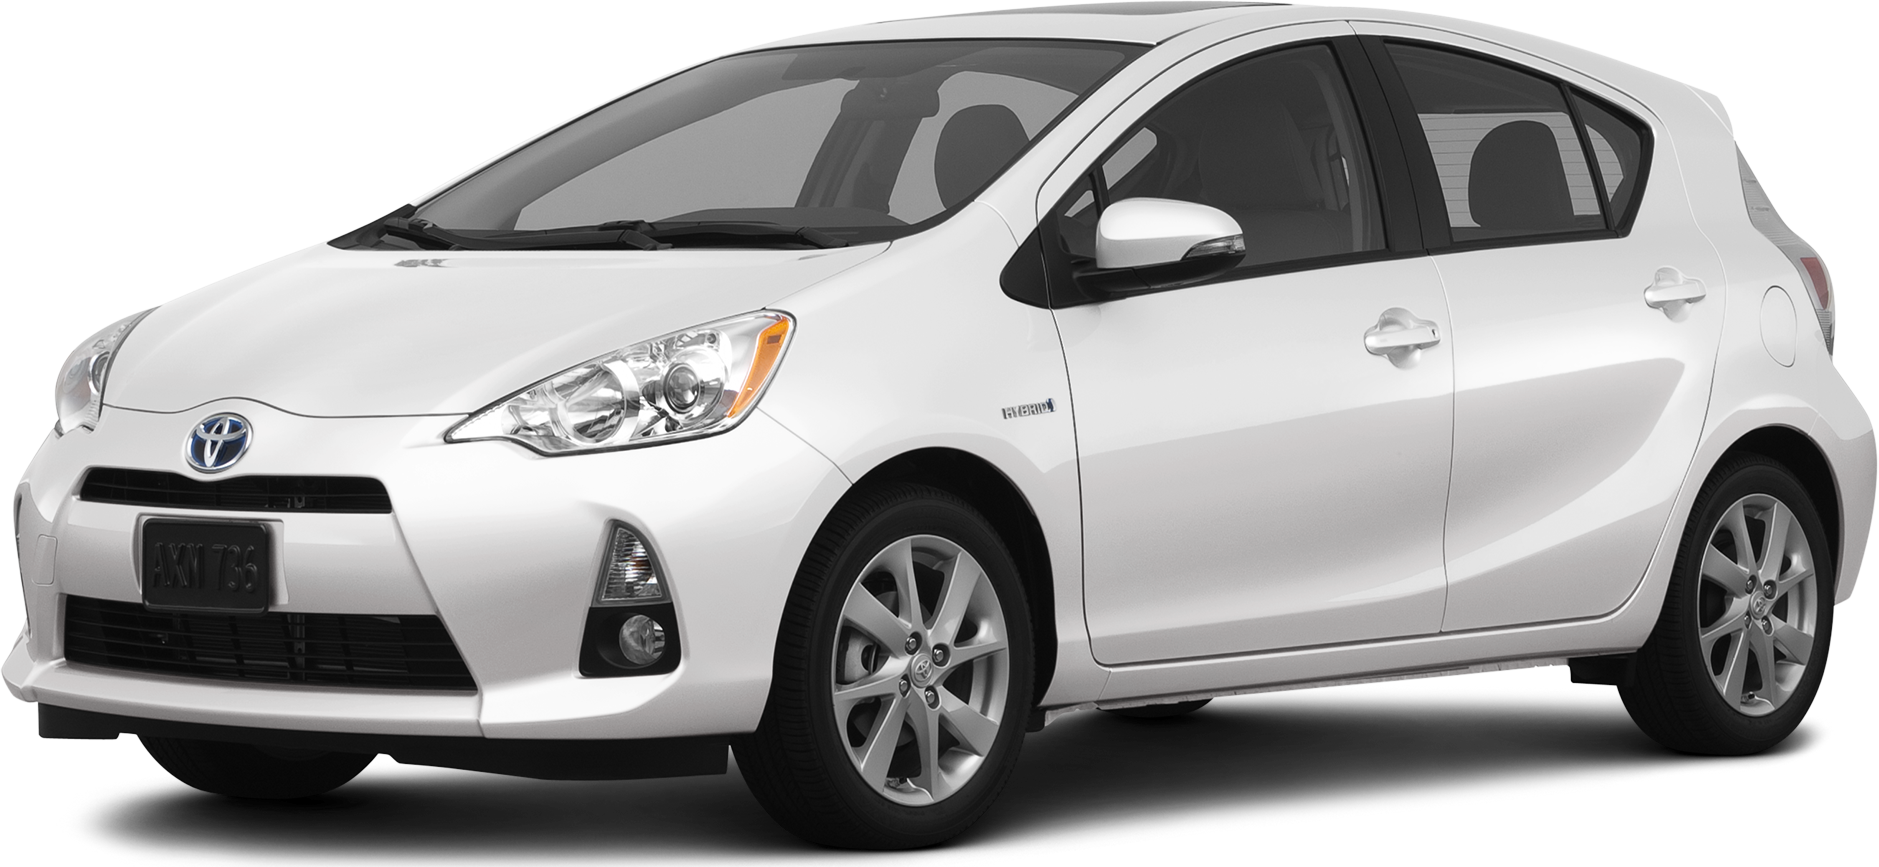 Used 2012 Toyota Prius c Four Hatchback 4D Prices | Kelley Blue Book